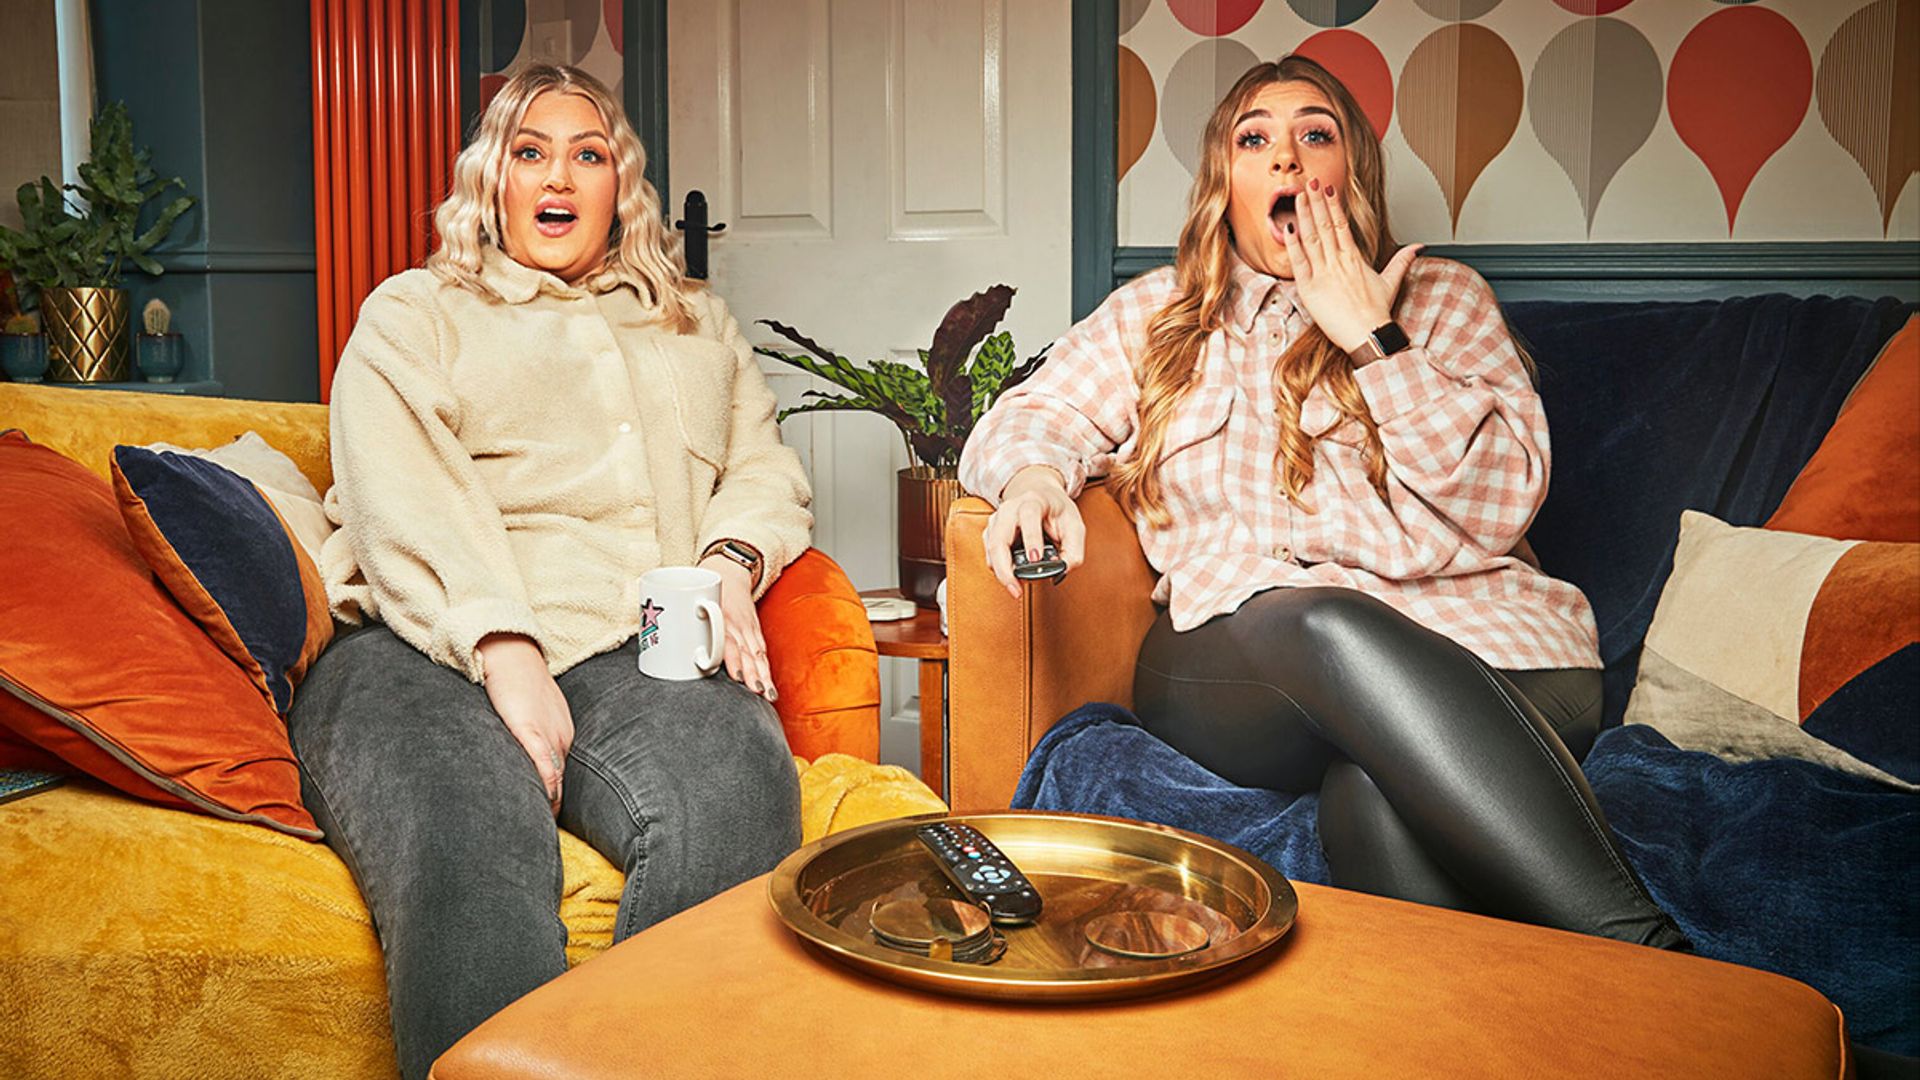 Gogglebox fans react after two surprising baby announcements